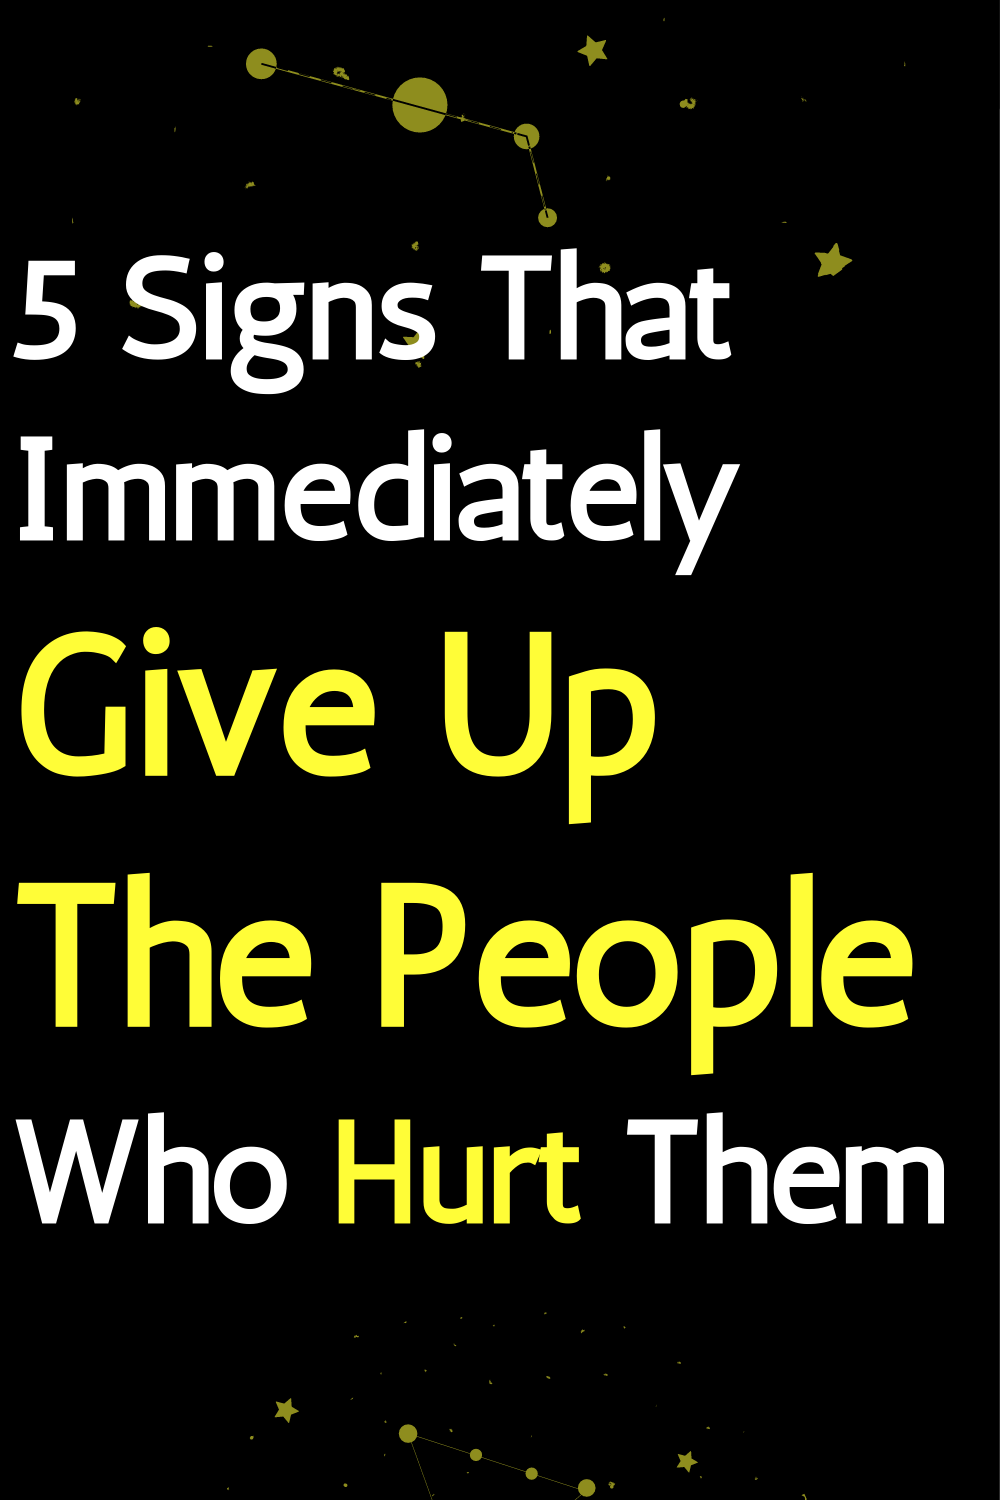 5 Signs That Immediately Give Up The People Who Hurt Them